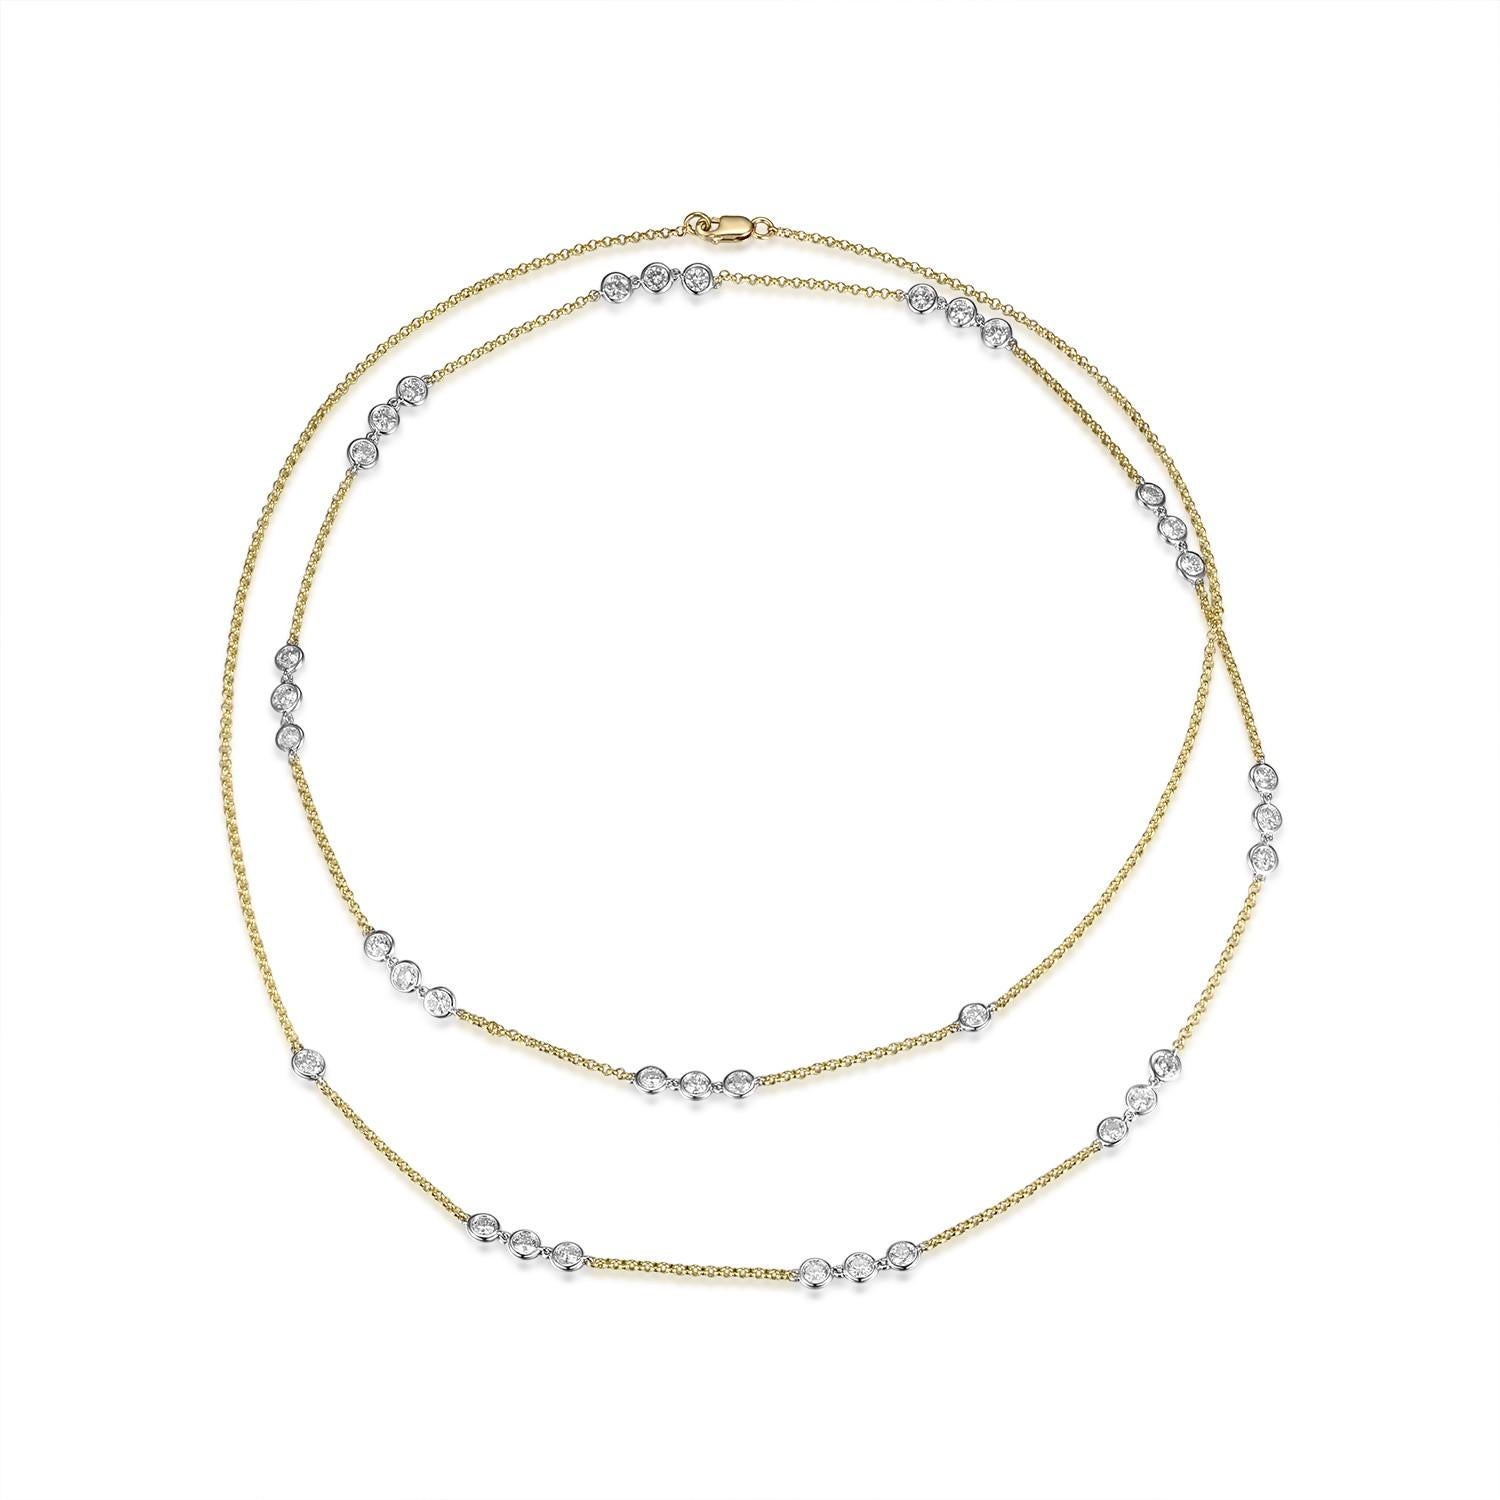 3.6 Carats 29-Station Diamond by the yard necklace set in 18K gold. The total weight is 3.60 ctw. Beautiful shiny stones. The total length is 34 inch. Great holiday gift for that special someone.
Necklace is made with 18 karat yellow gold and